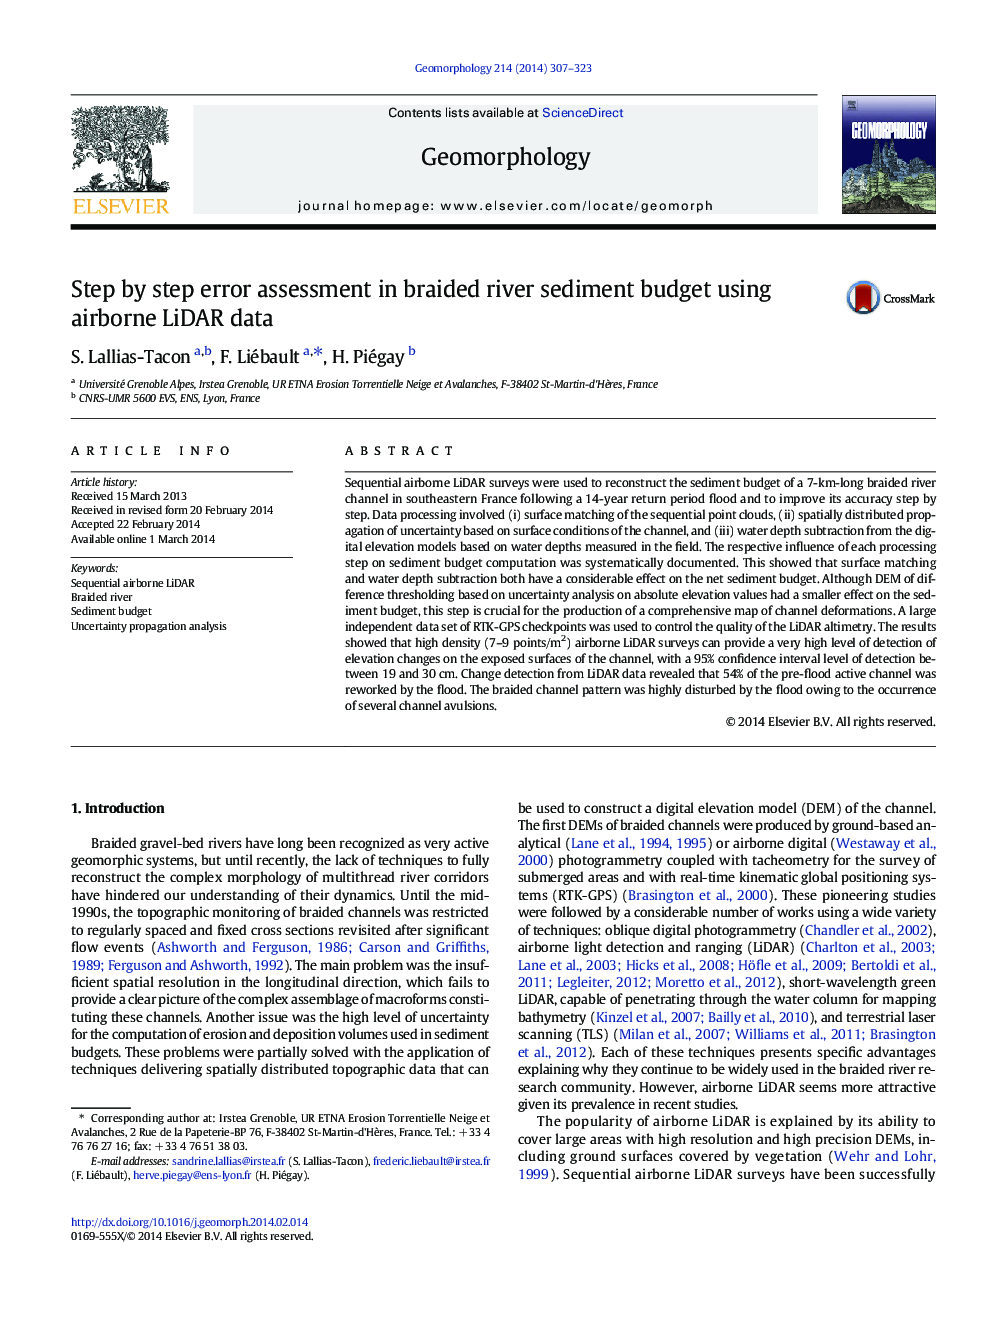 Step by step error assessment in braided river sediment budget using airborne LiDAR data